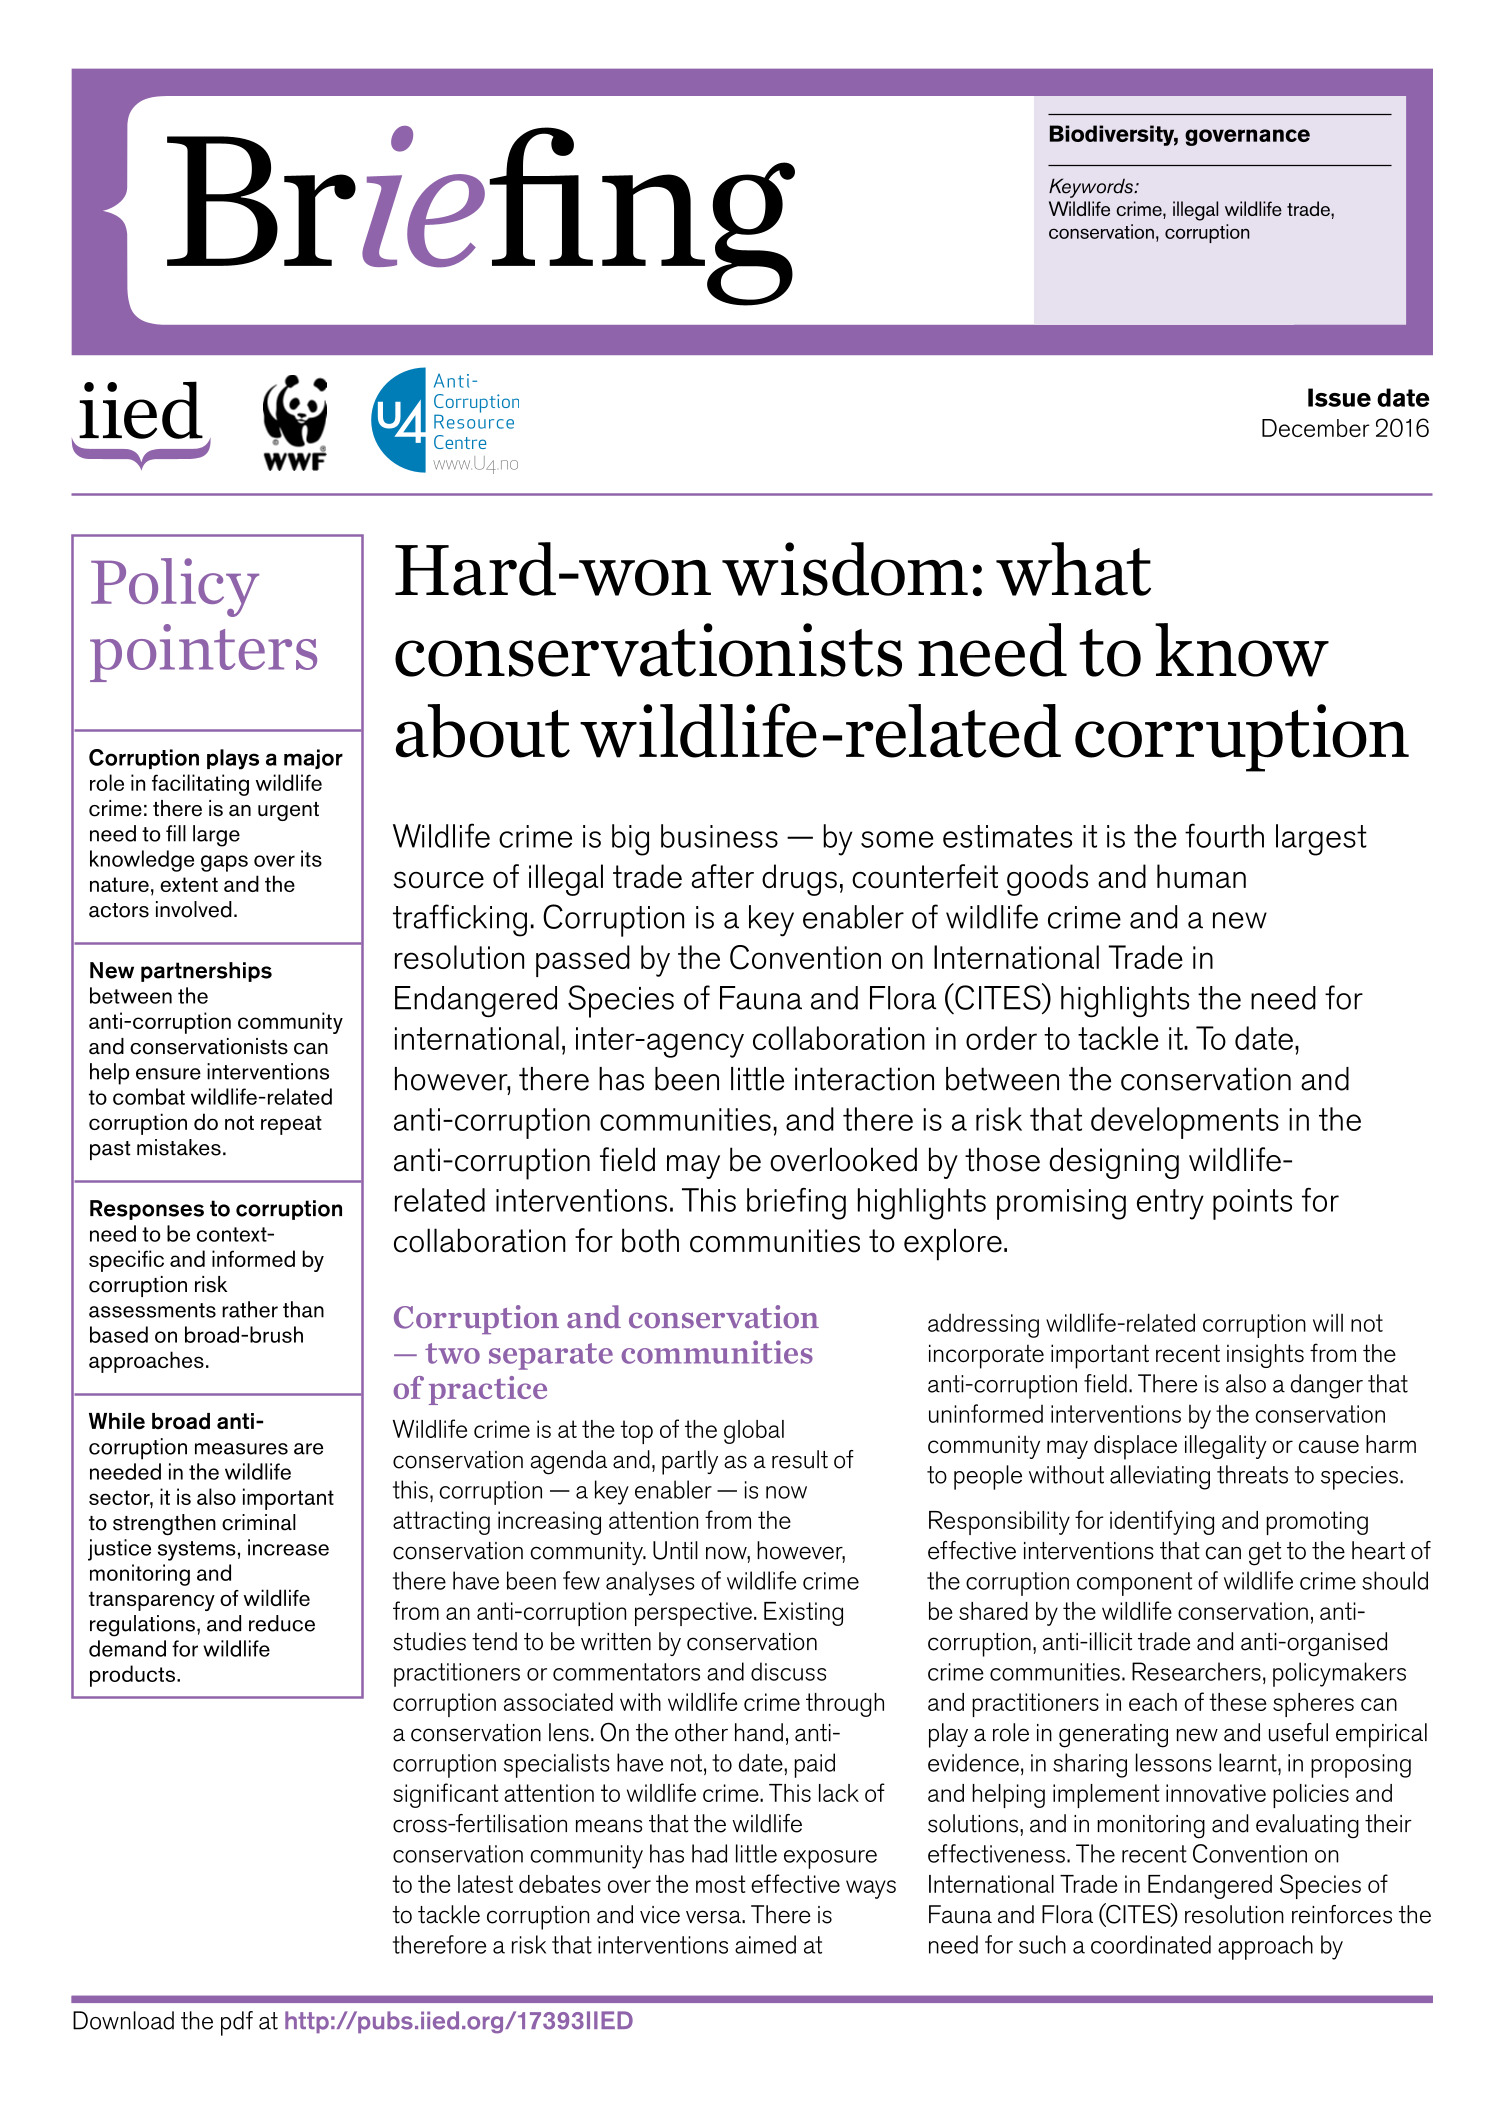 Hard-won wisdom: what conservationists need to know about wildlife-related corruption